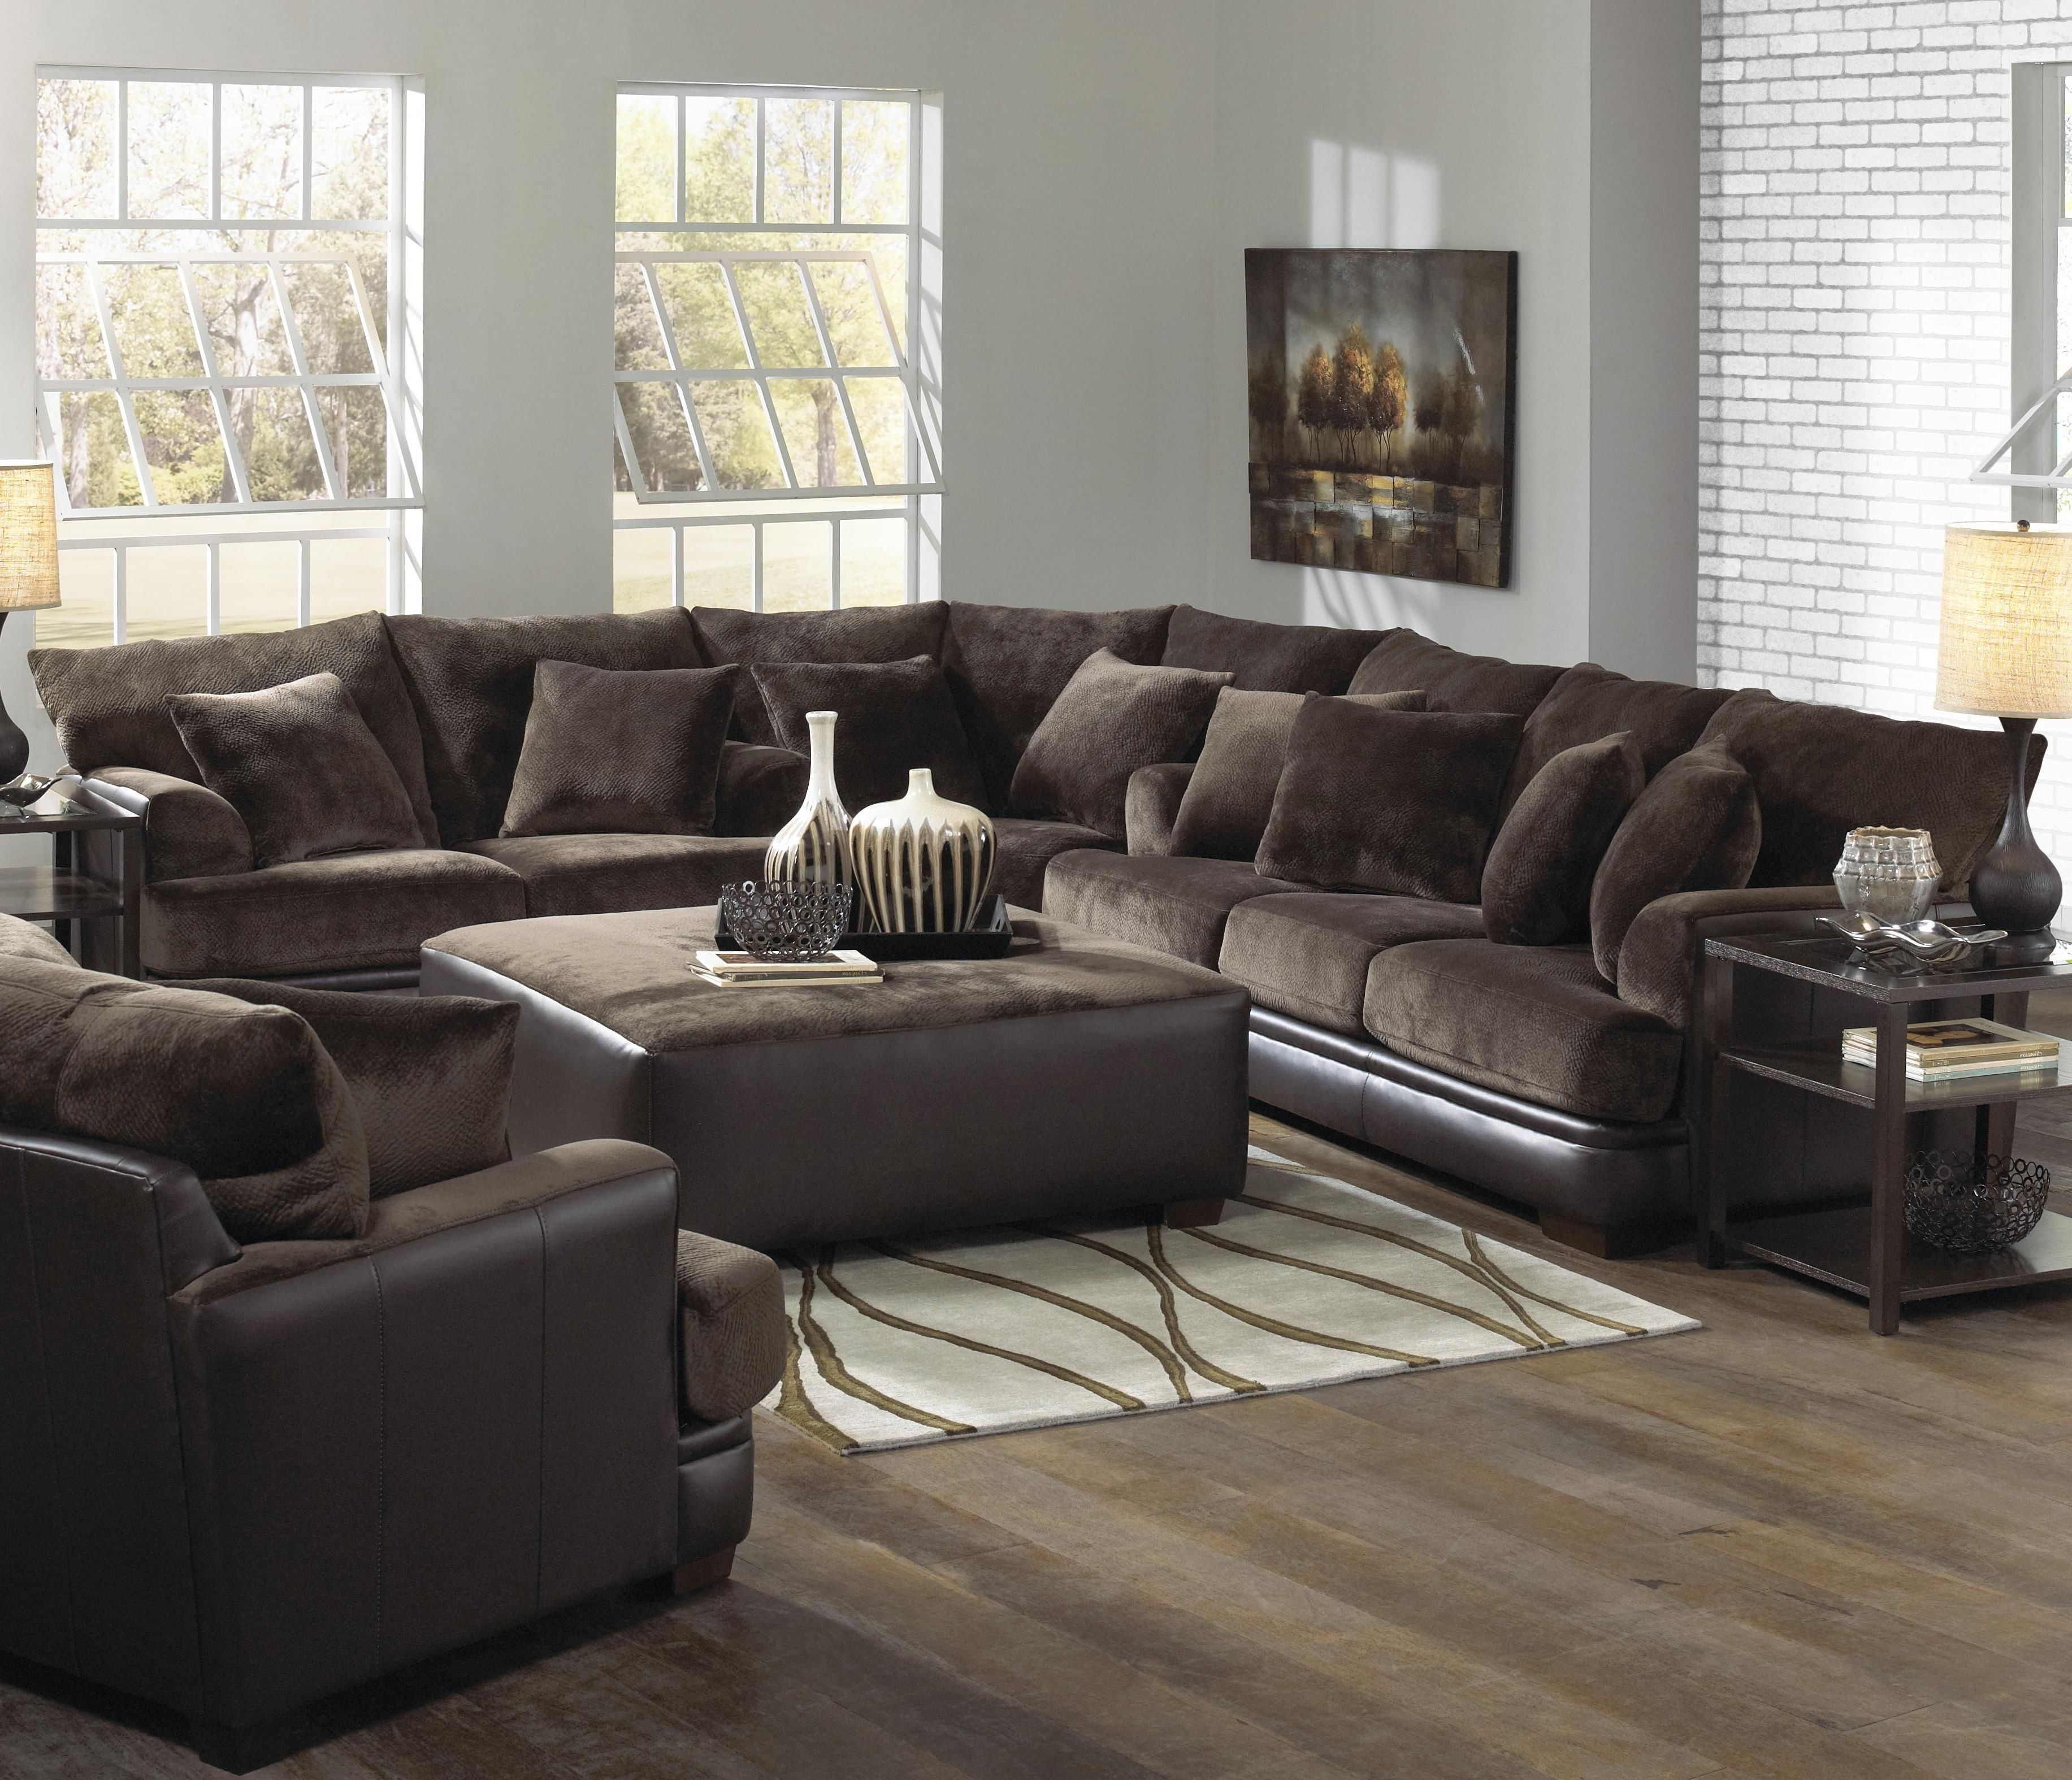 Sofa Right Sectional Braxton Java Arm Facing Hand Pb Basic Chaise Throughout Most Current Regina Sectional Sofas (View 17 of 20)